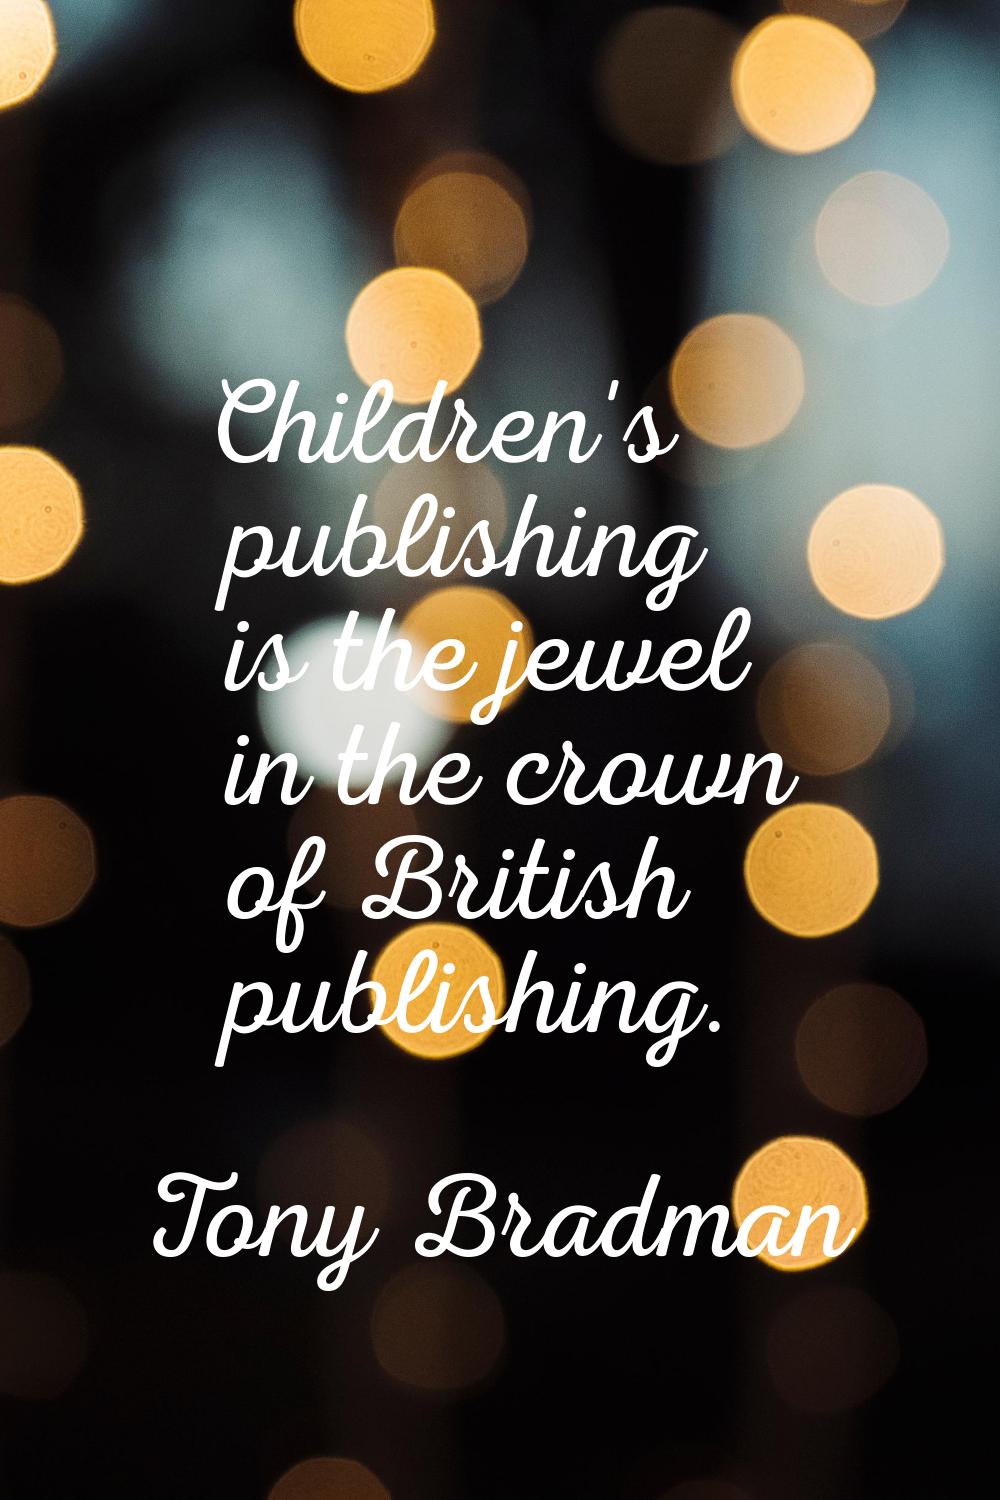 Children's publishing is the jewel in the crown of British publishing.